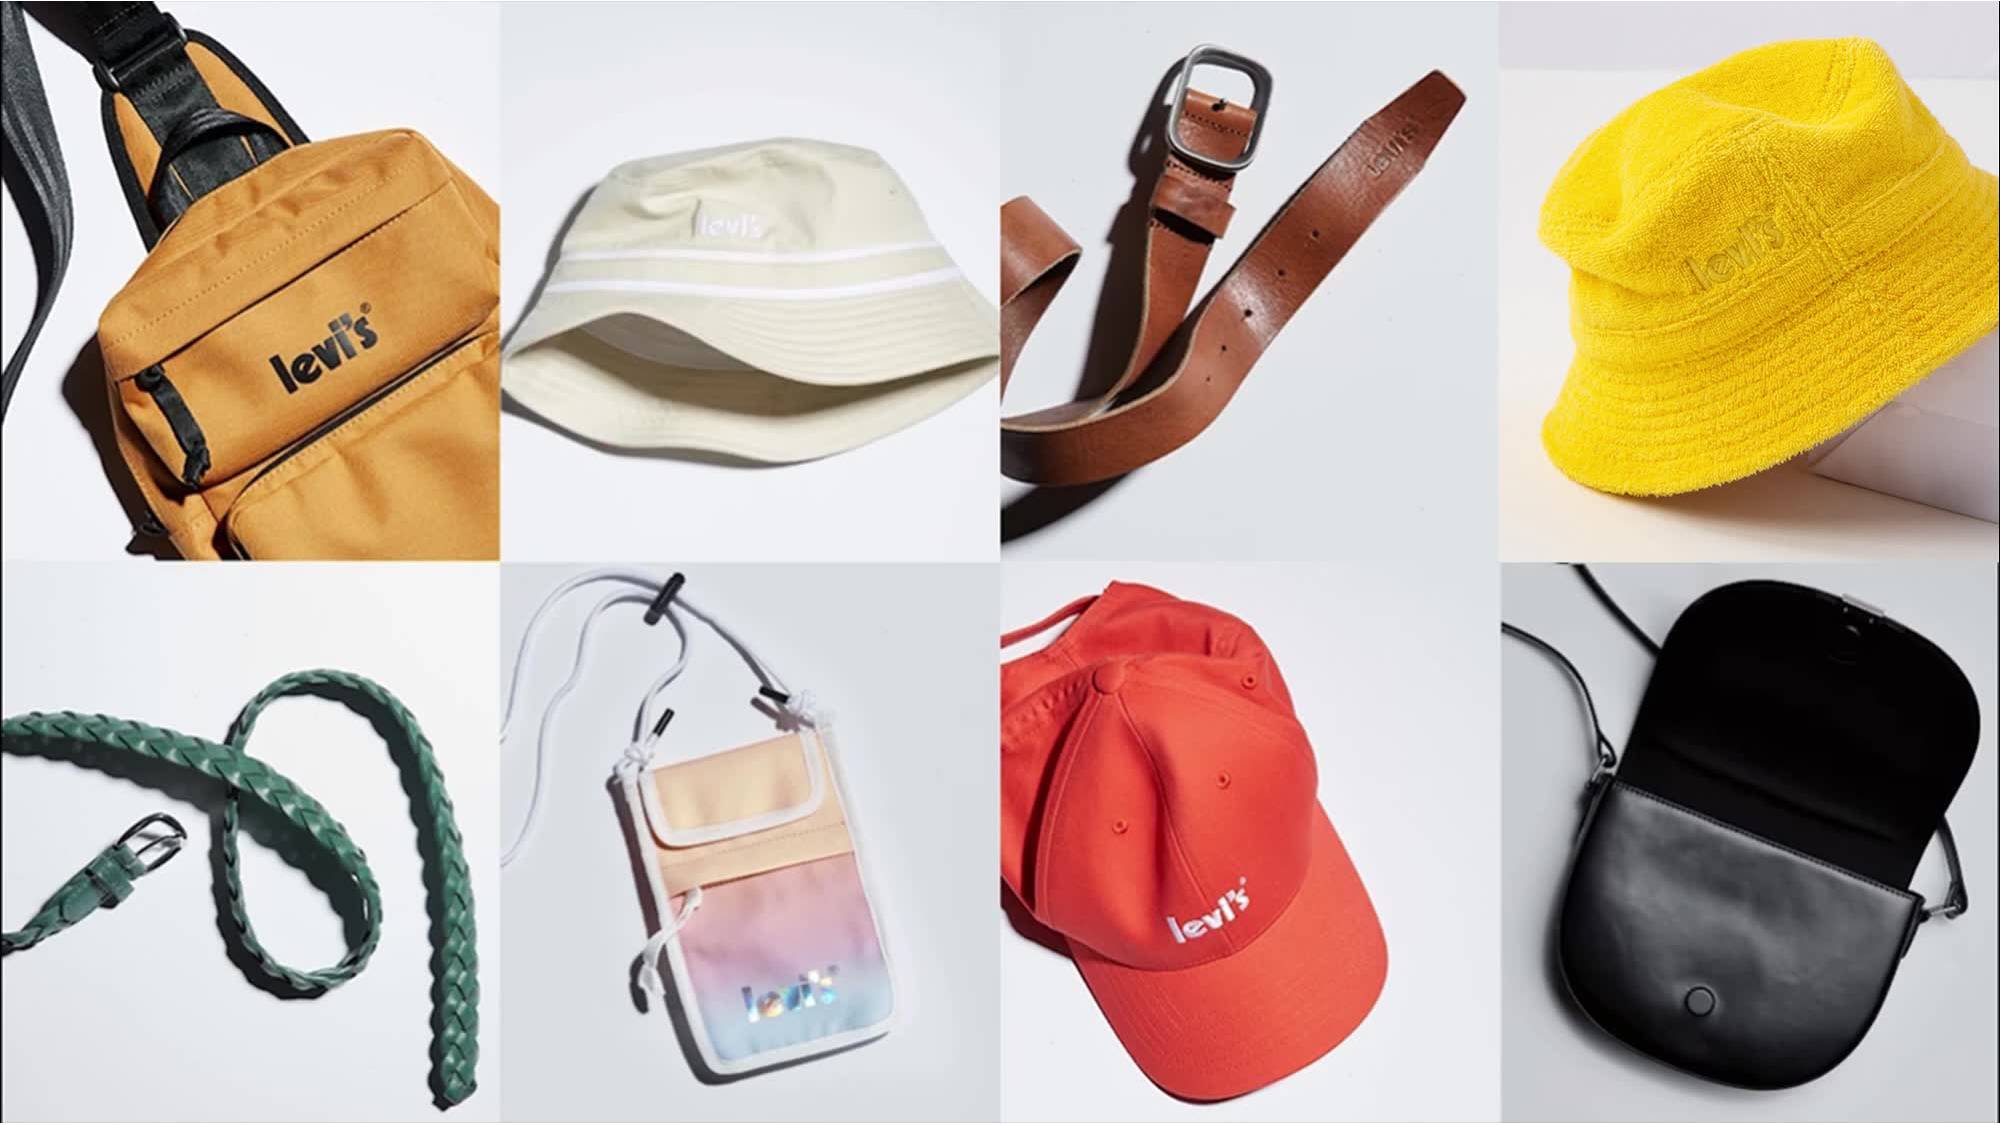 Levi's holiday accessories Hats, Belts, Bags in different colors and styles.